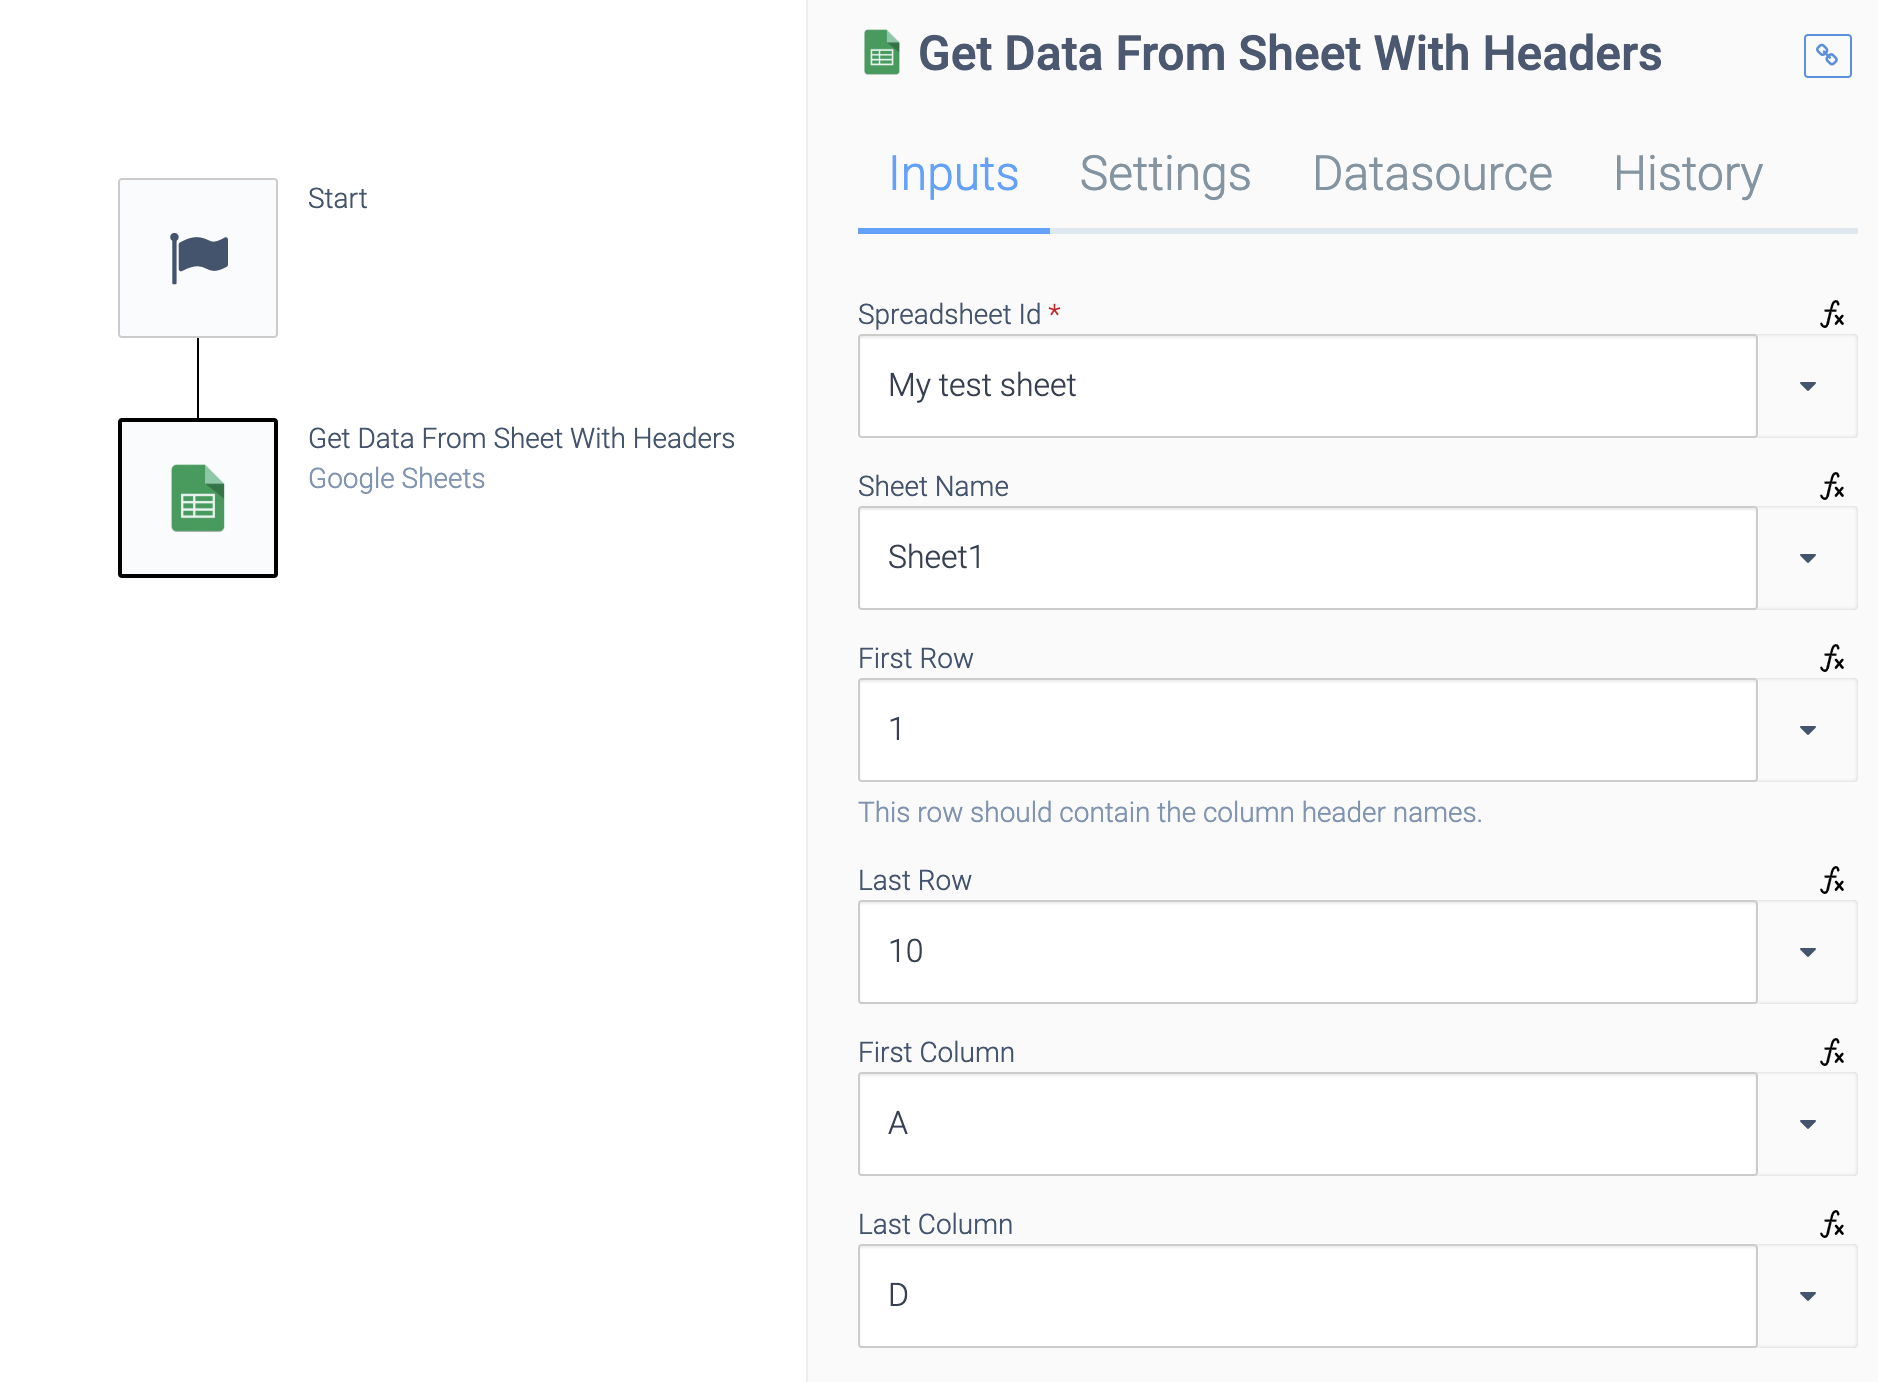 The Get Data From Sheet With Headers block.